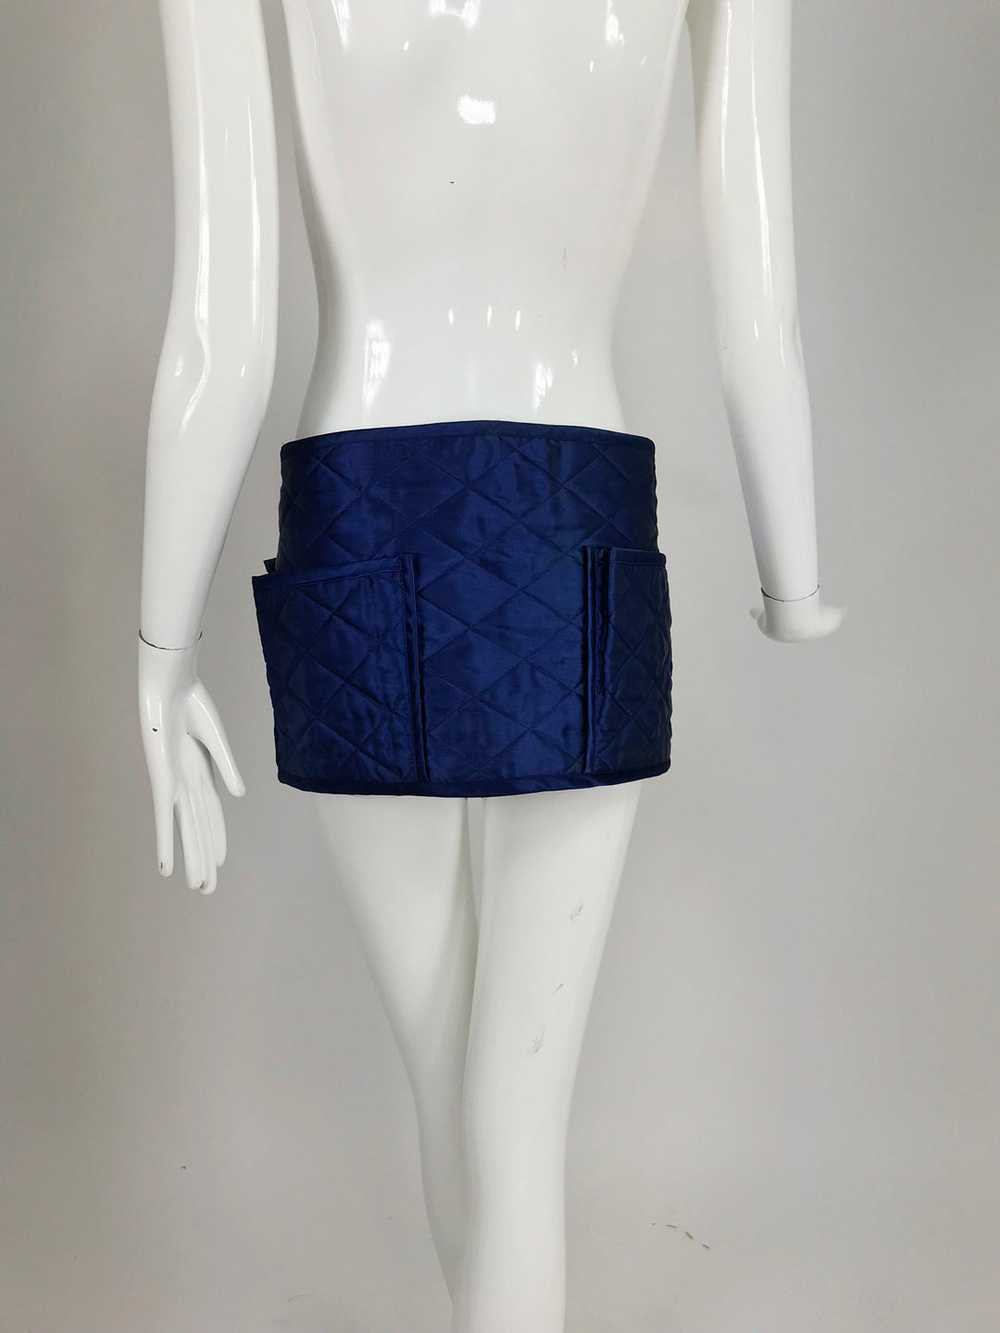 Sonia Rykiel quilted blue satin belt or skirt wit… - image 8